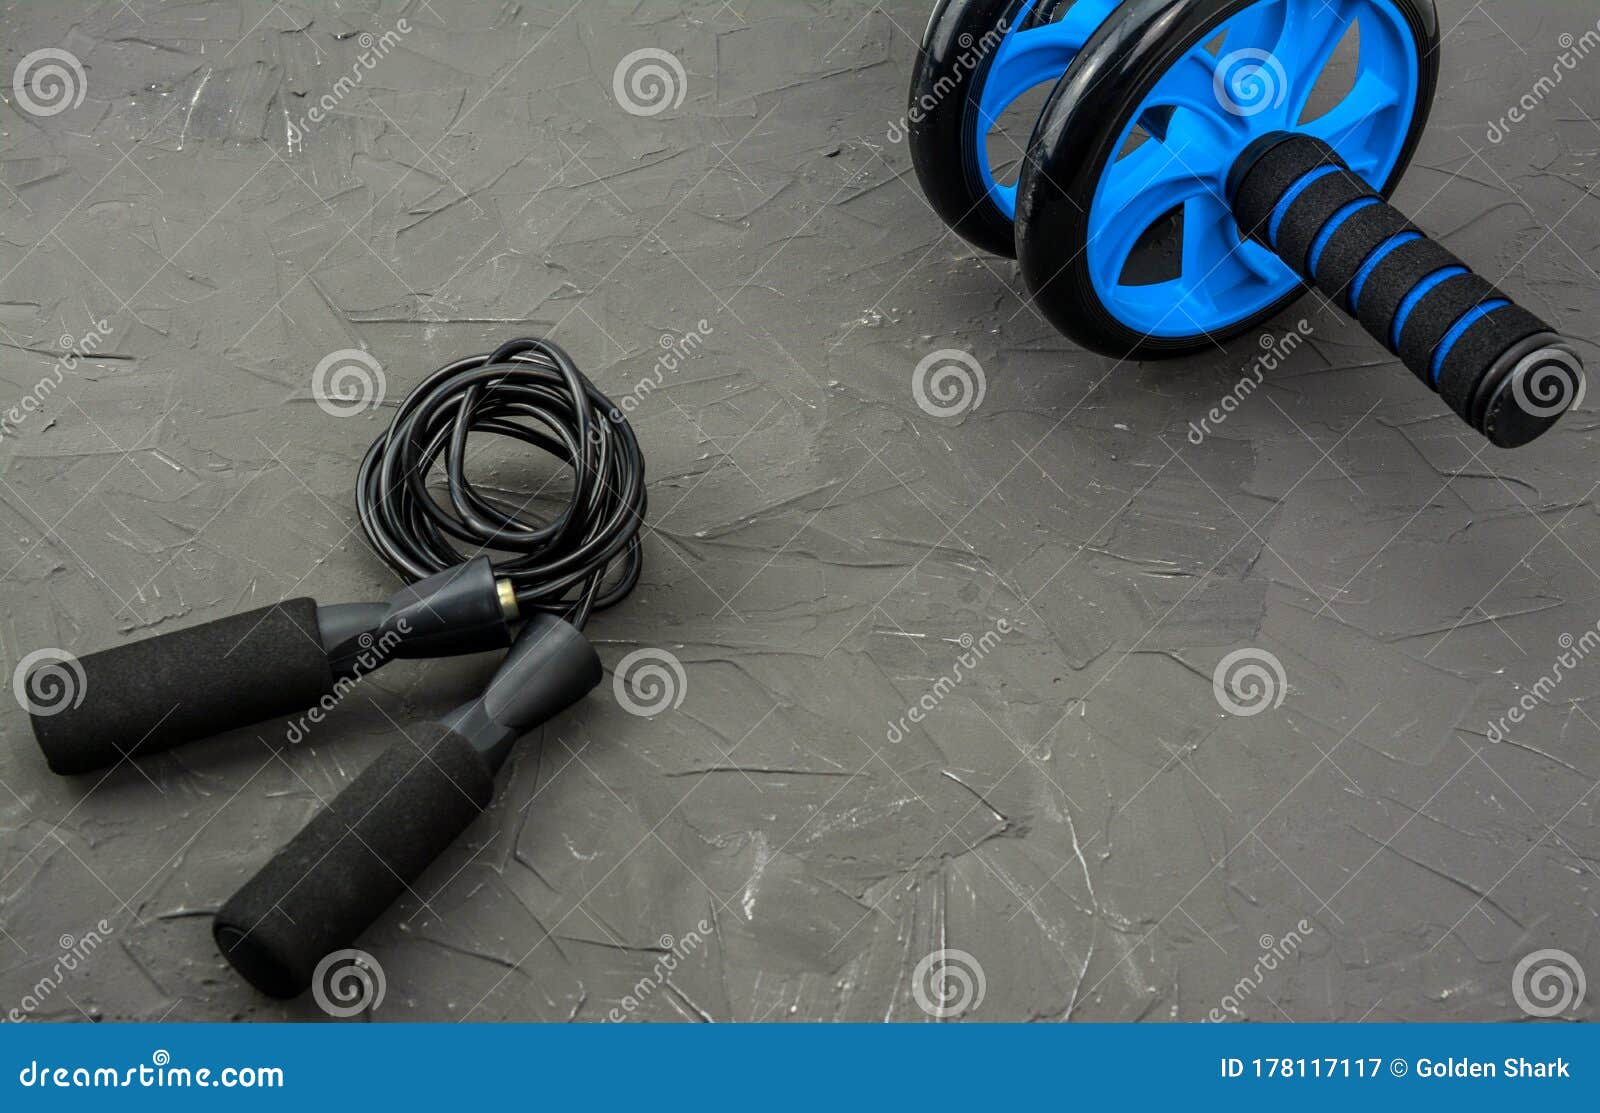 Sport Equipment Fitness Roller Skipping Rope Stock Image - Image of ...